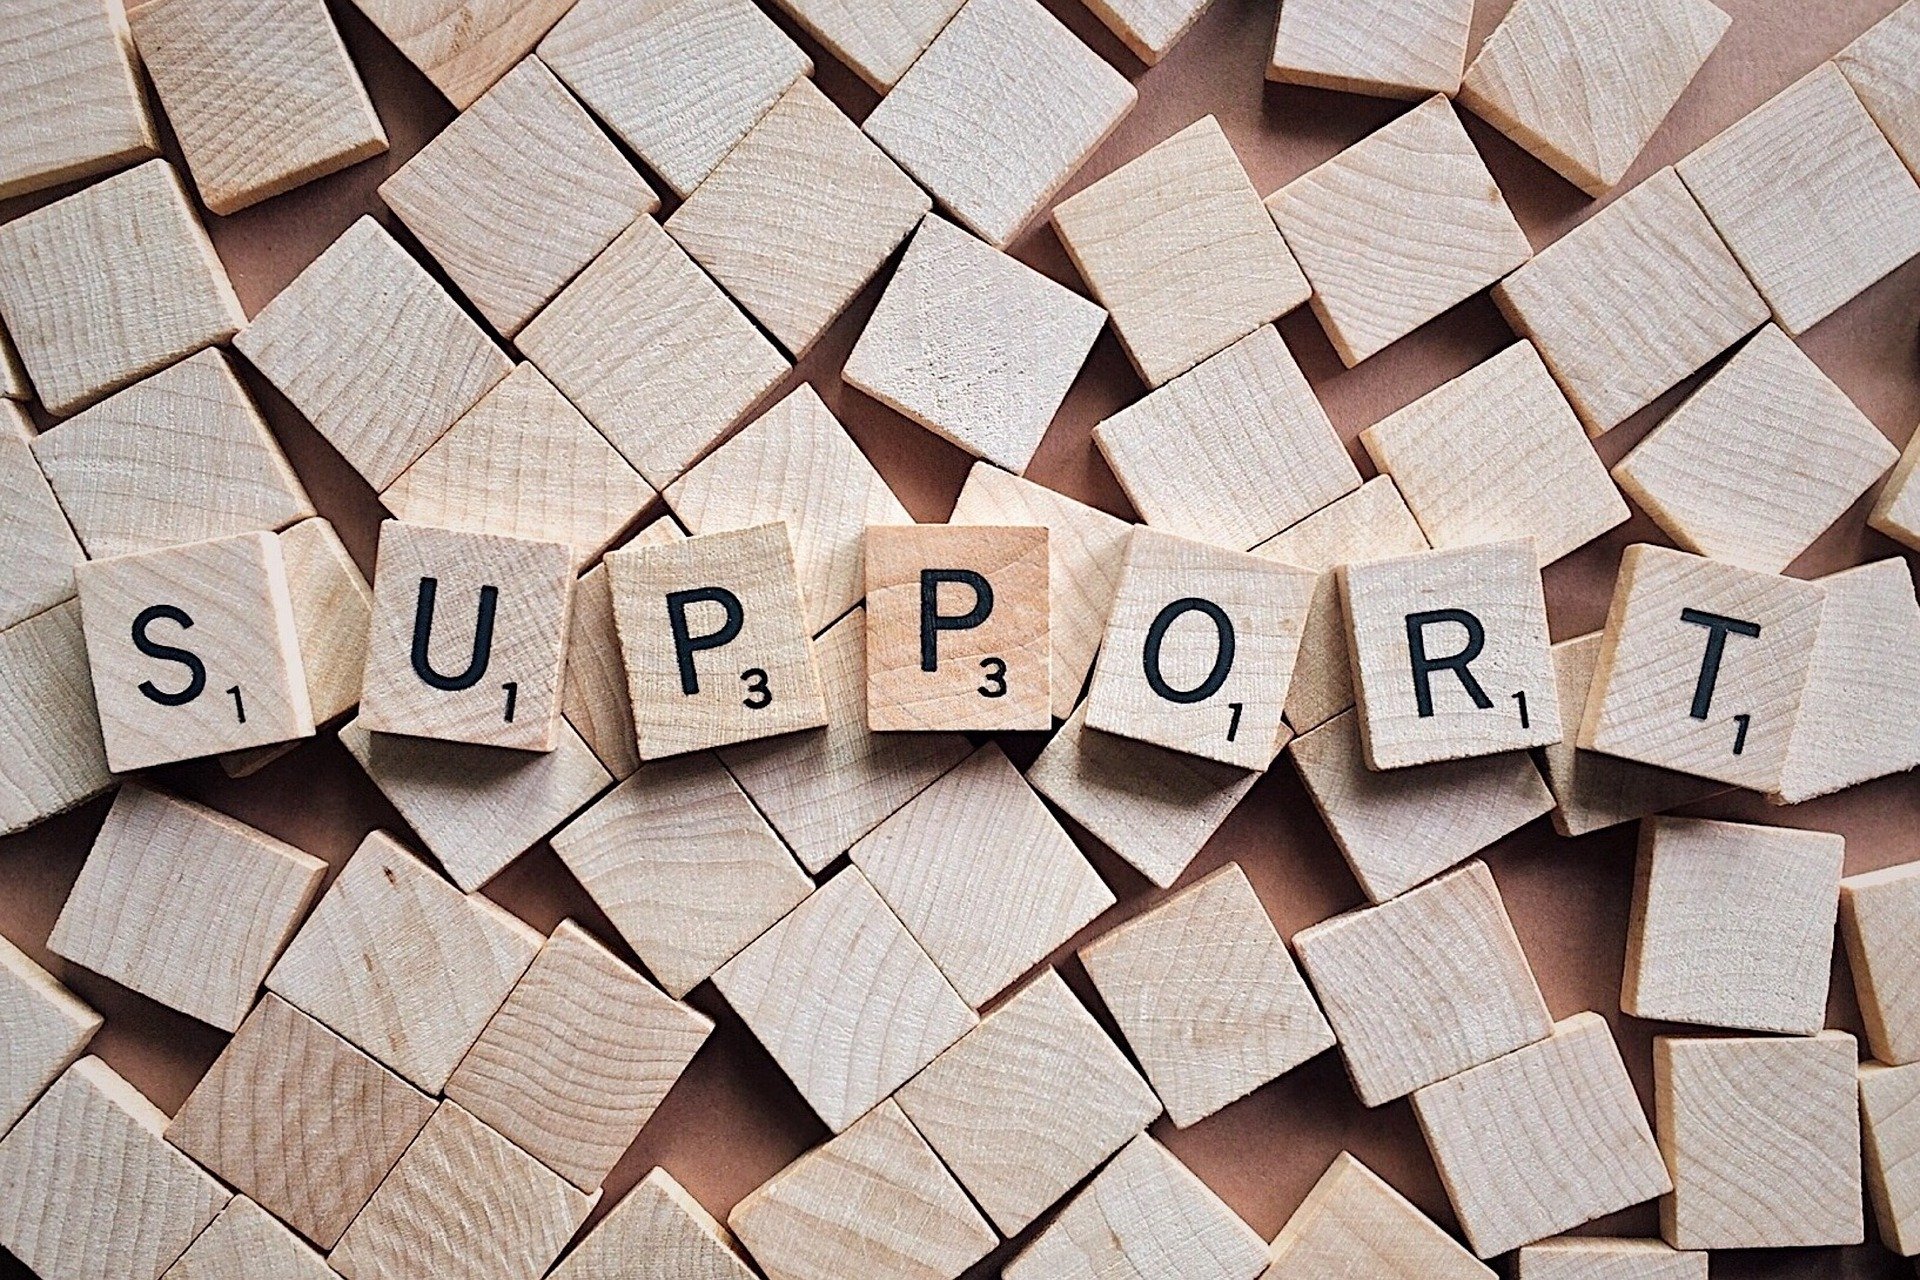 scrabble tiles (wooden blocks) used to spell the word "support"